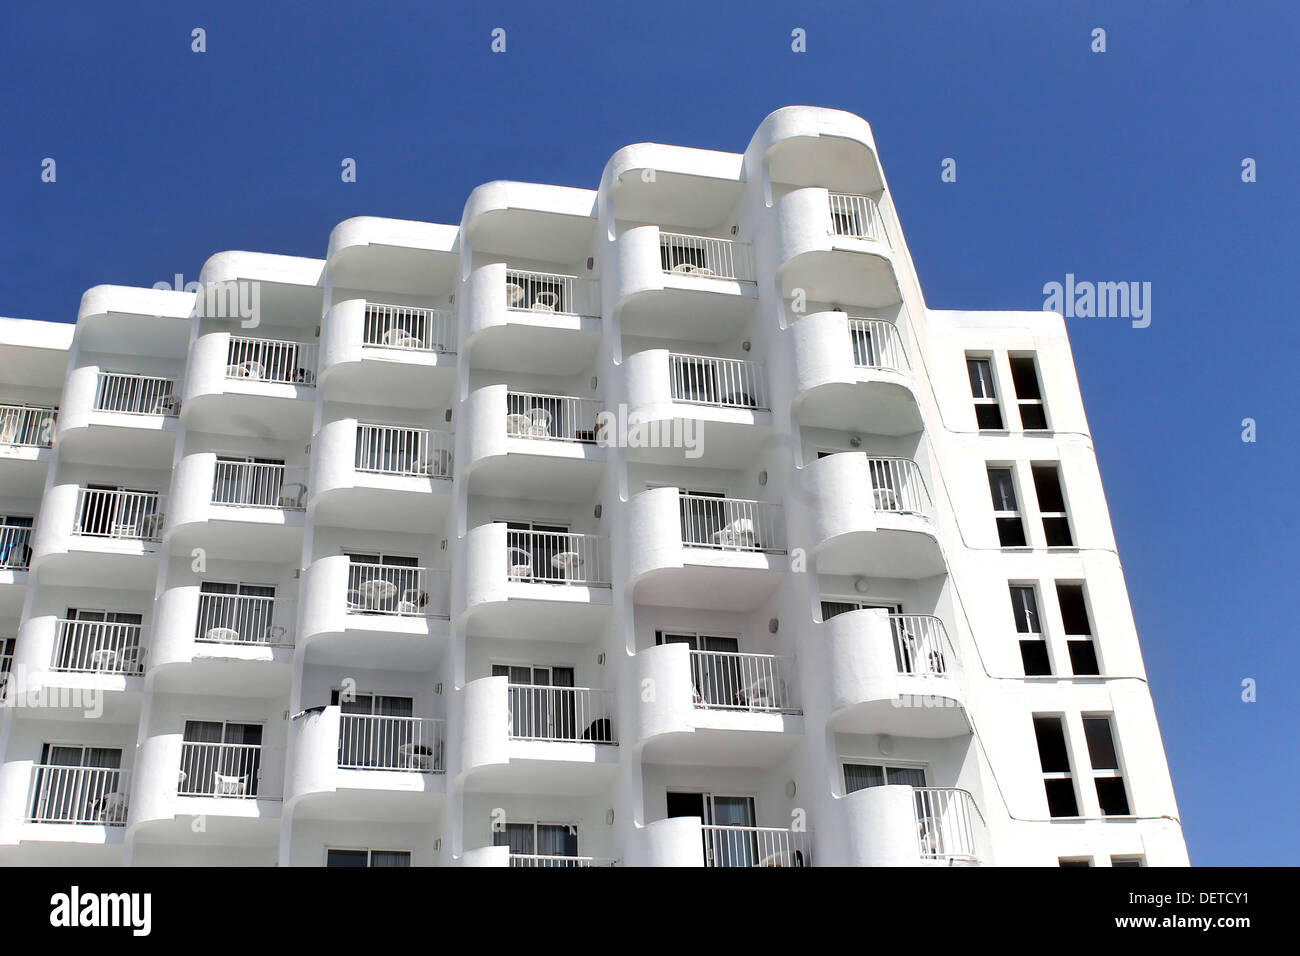 Low angle view of old white hotel building with blue sky background. Stock Photo